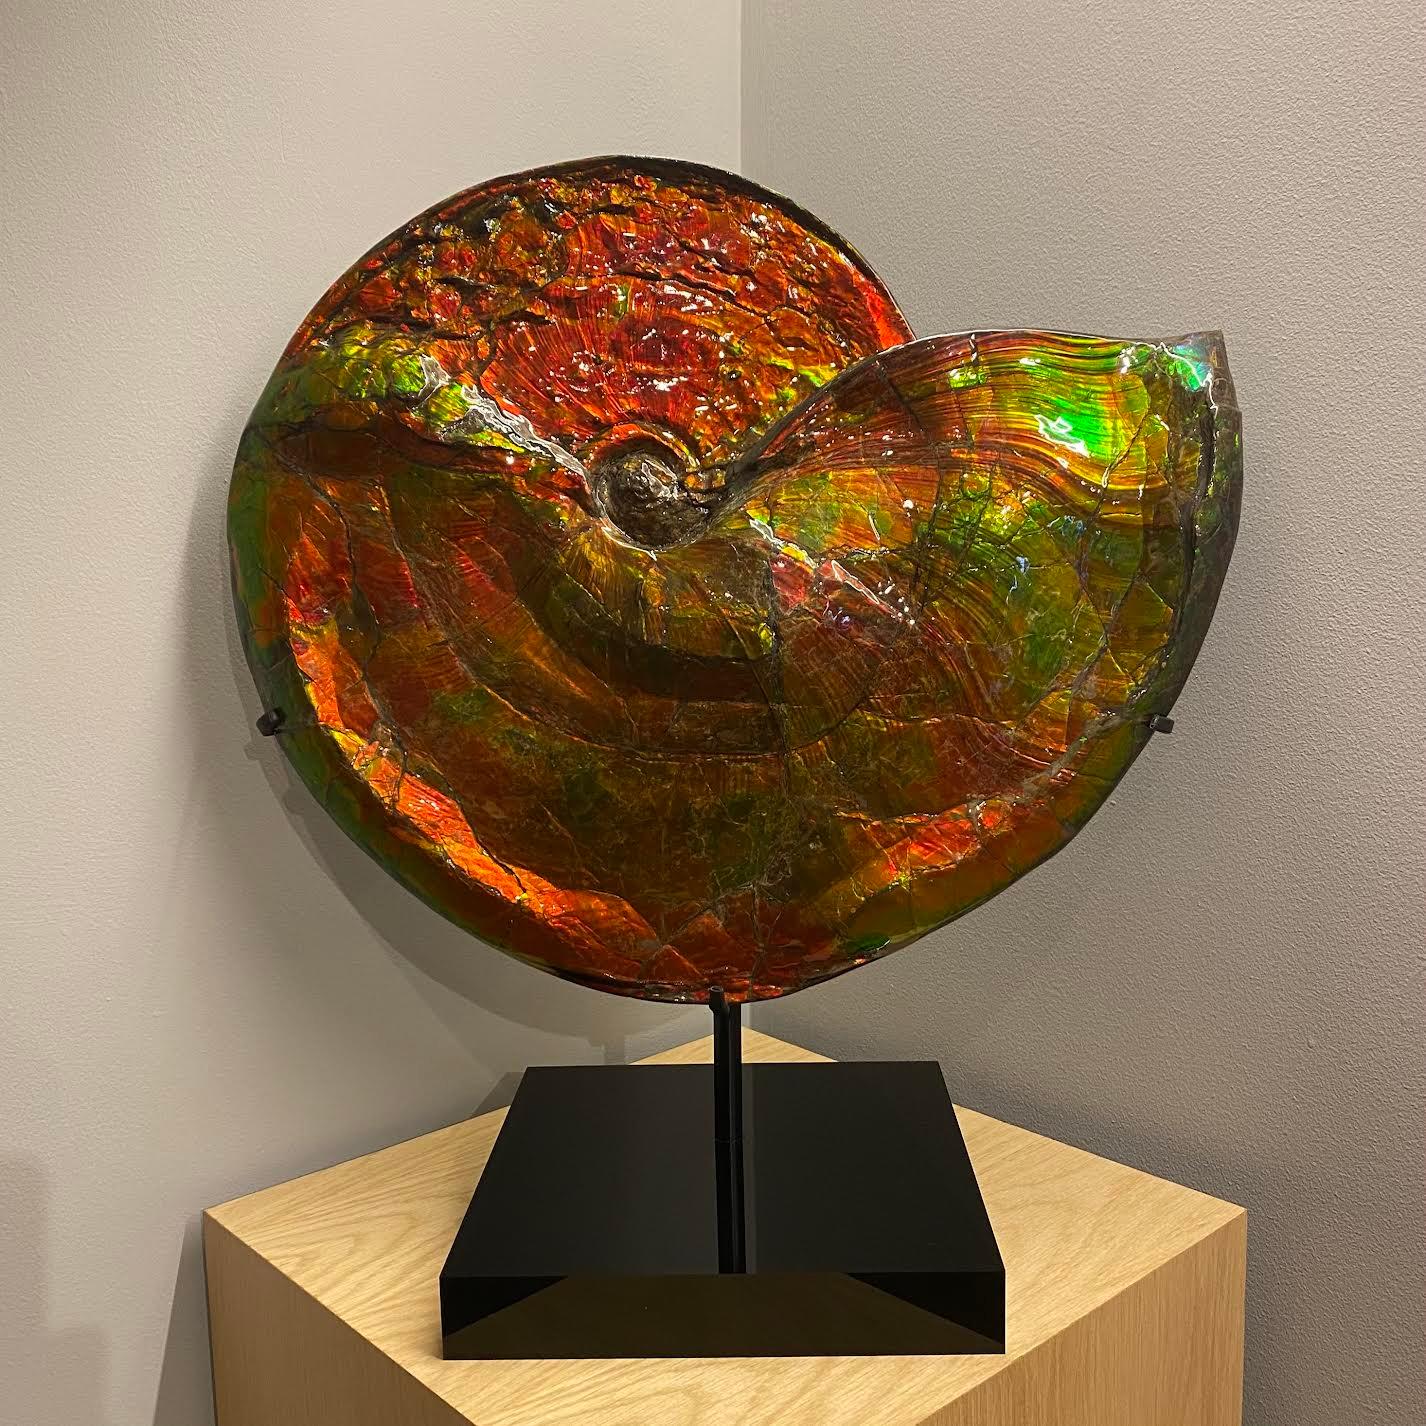 Rare Iridescent Ammonite

'Placenticeras intercalare'
Upper Cretaceous (75-72 million years ago)
Measures: 46 x 41 x 7 cm
Alberta, Canada 

Known as ‘Ammolite’, the shimmering, metallic colours were caused by the combination of millions of years of